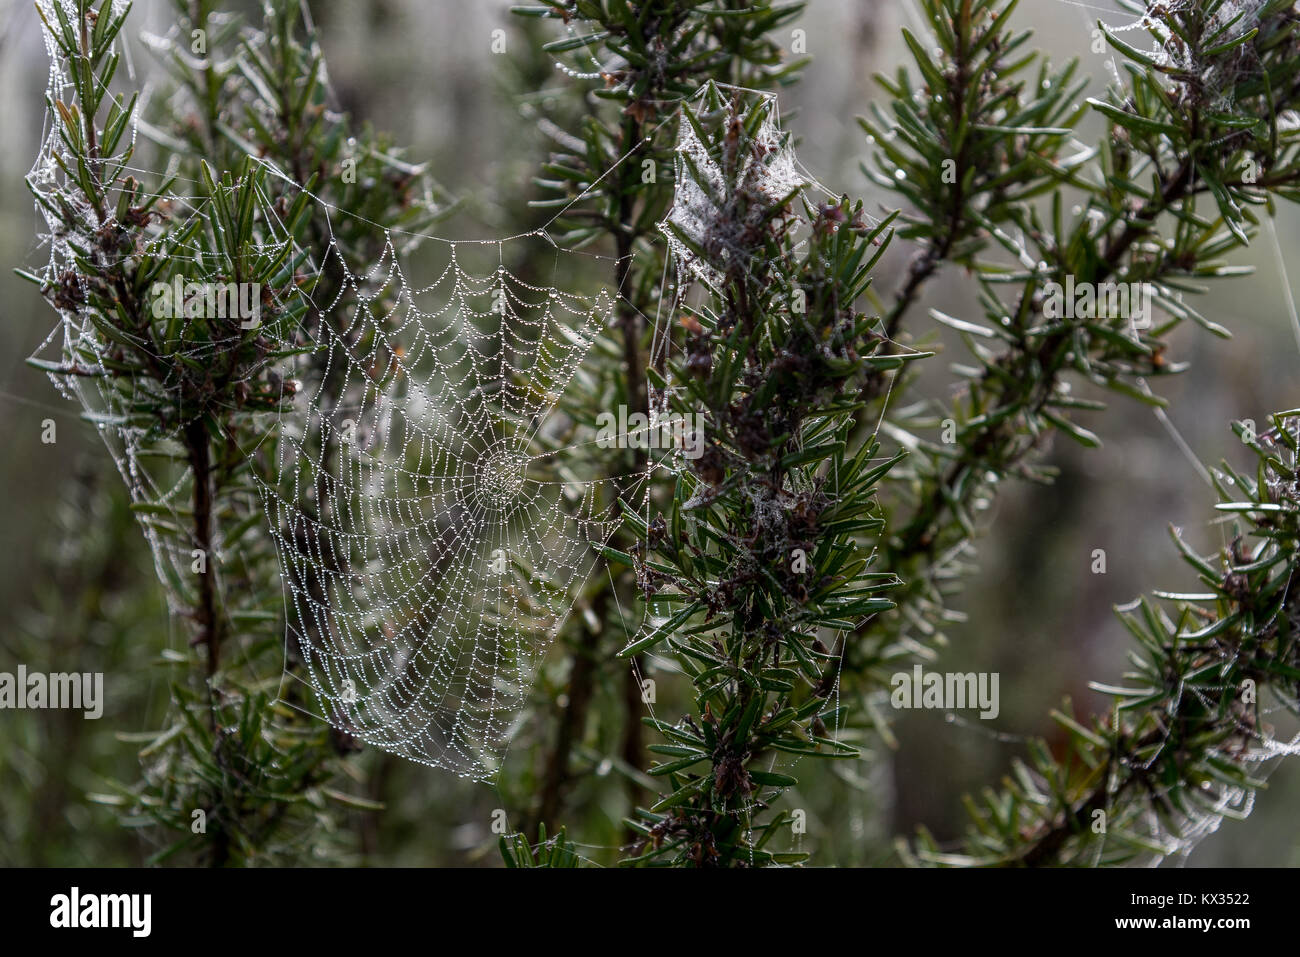 The morning dew covers thousands of fine drops of water a cobweb woven into a bush Stock Photo